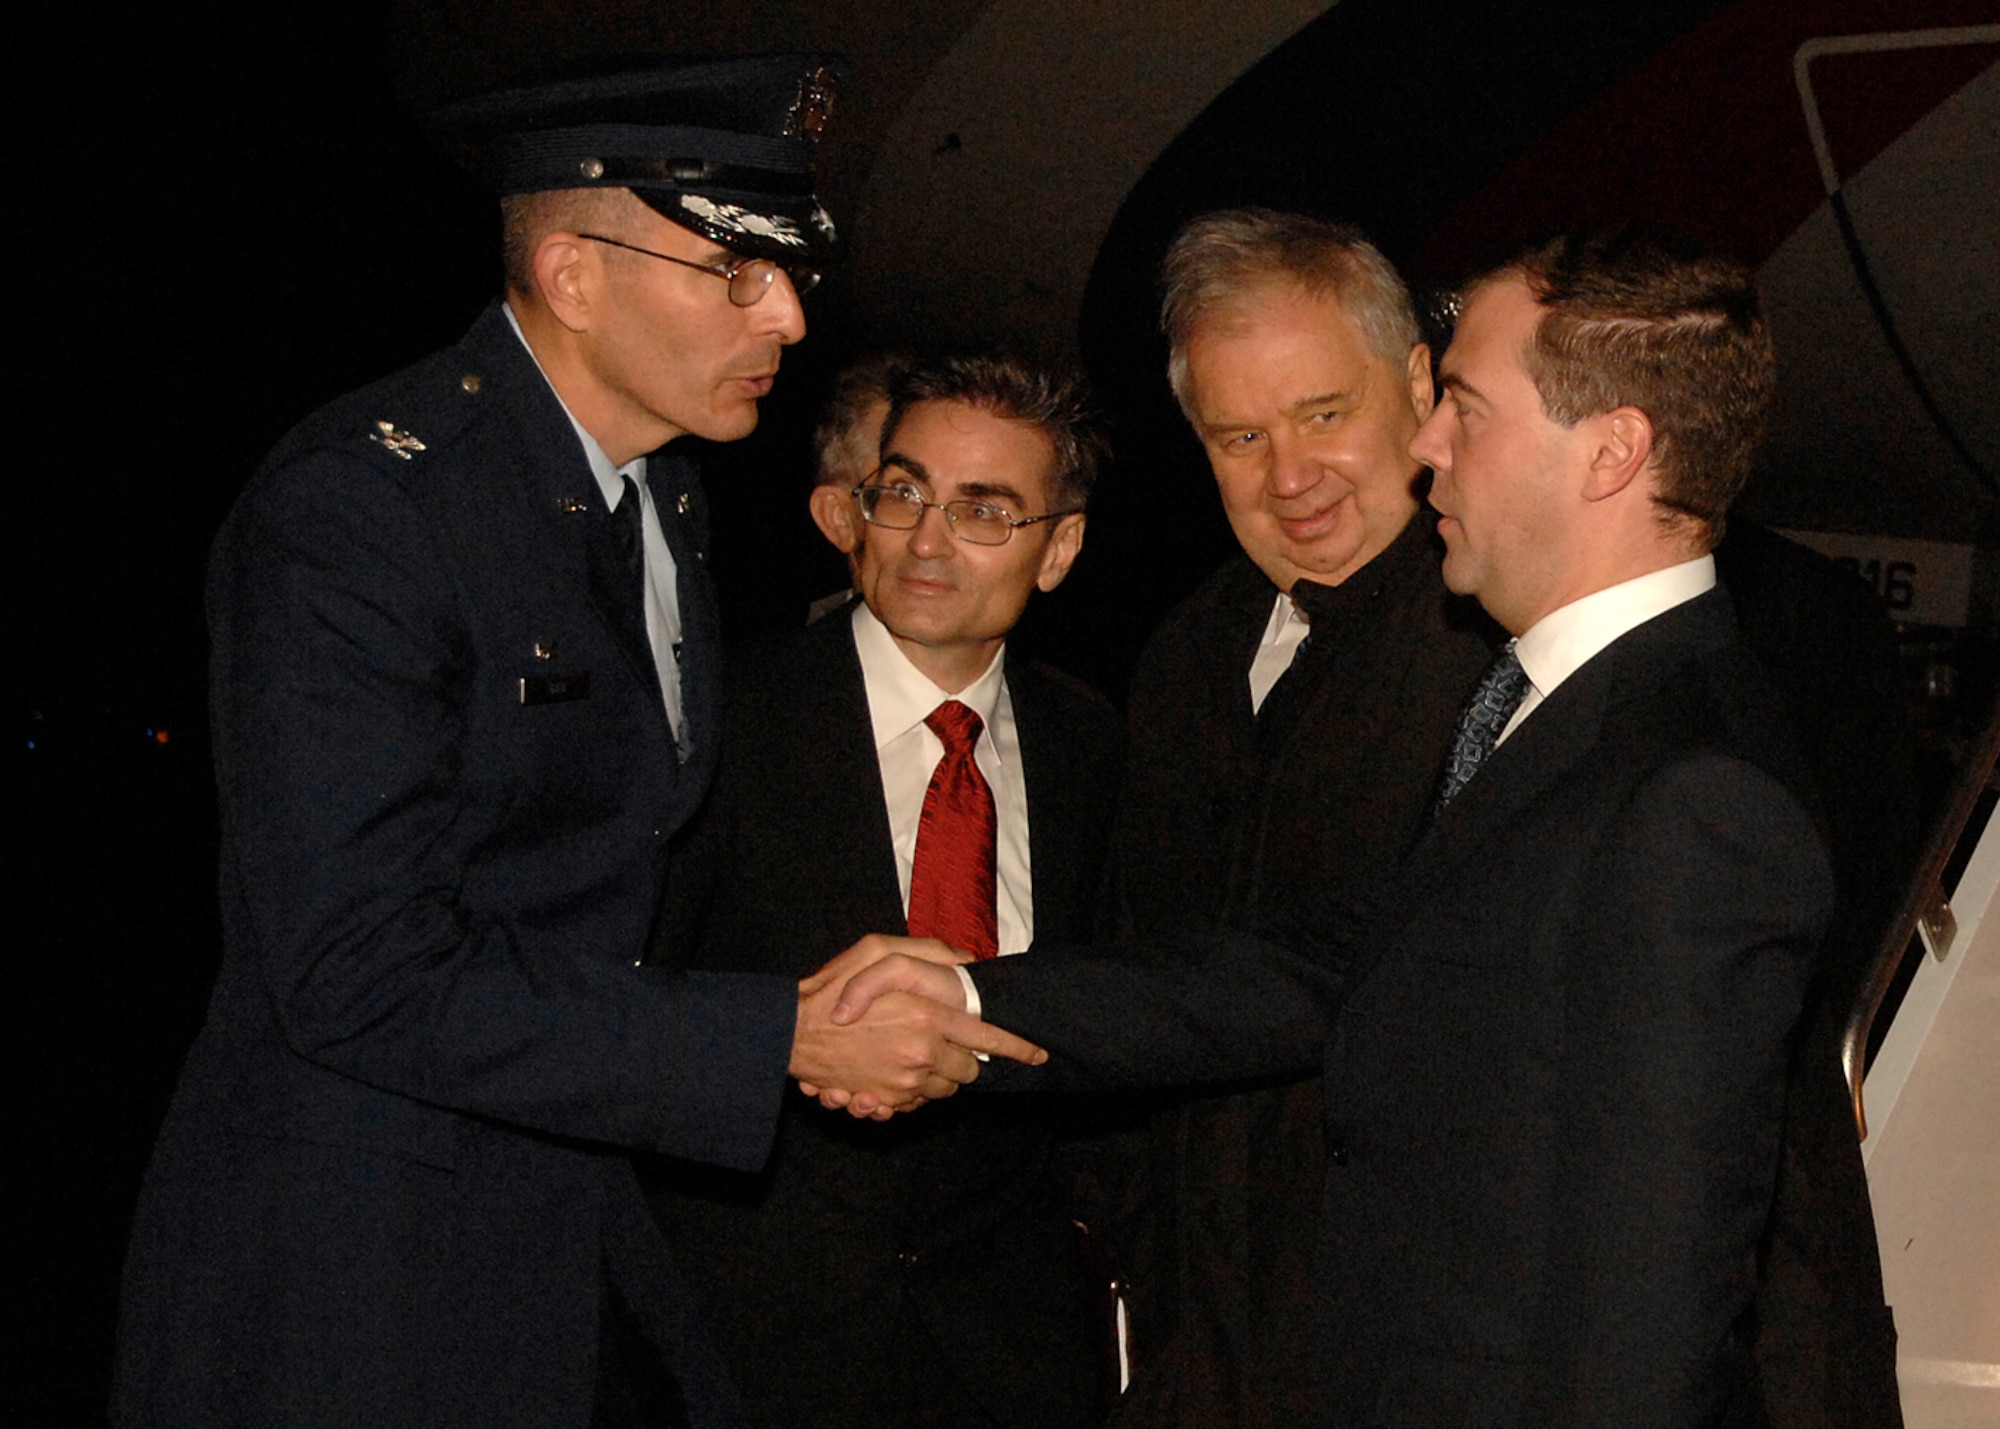 Colonel Clair Gilk, 316th Operations Group commander, greets Russian President Dmitry Medvedev at Andrews Air Force Base, Md., Nov. 14, 2008, for the two-day G20 Summit at the White House in Washington. The summit, hosted by U.S. President George W. Bush, will bring together world leaders to discuss the increasing global financial crisis, its causes and efforts to resolve it. (U.S. Air Force photo by Airman 1st Class Melissa V. Rodrigues)